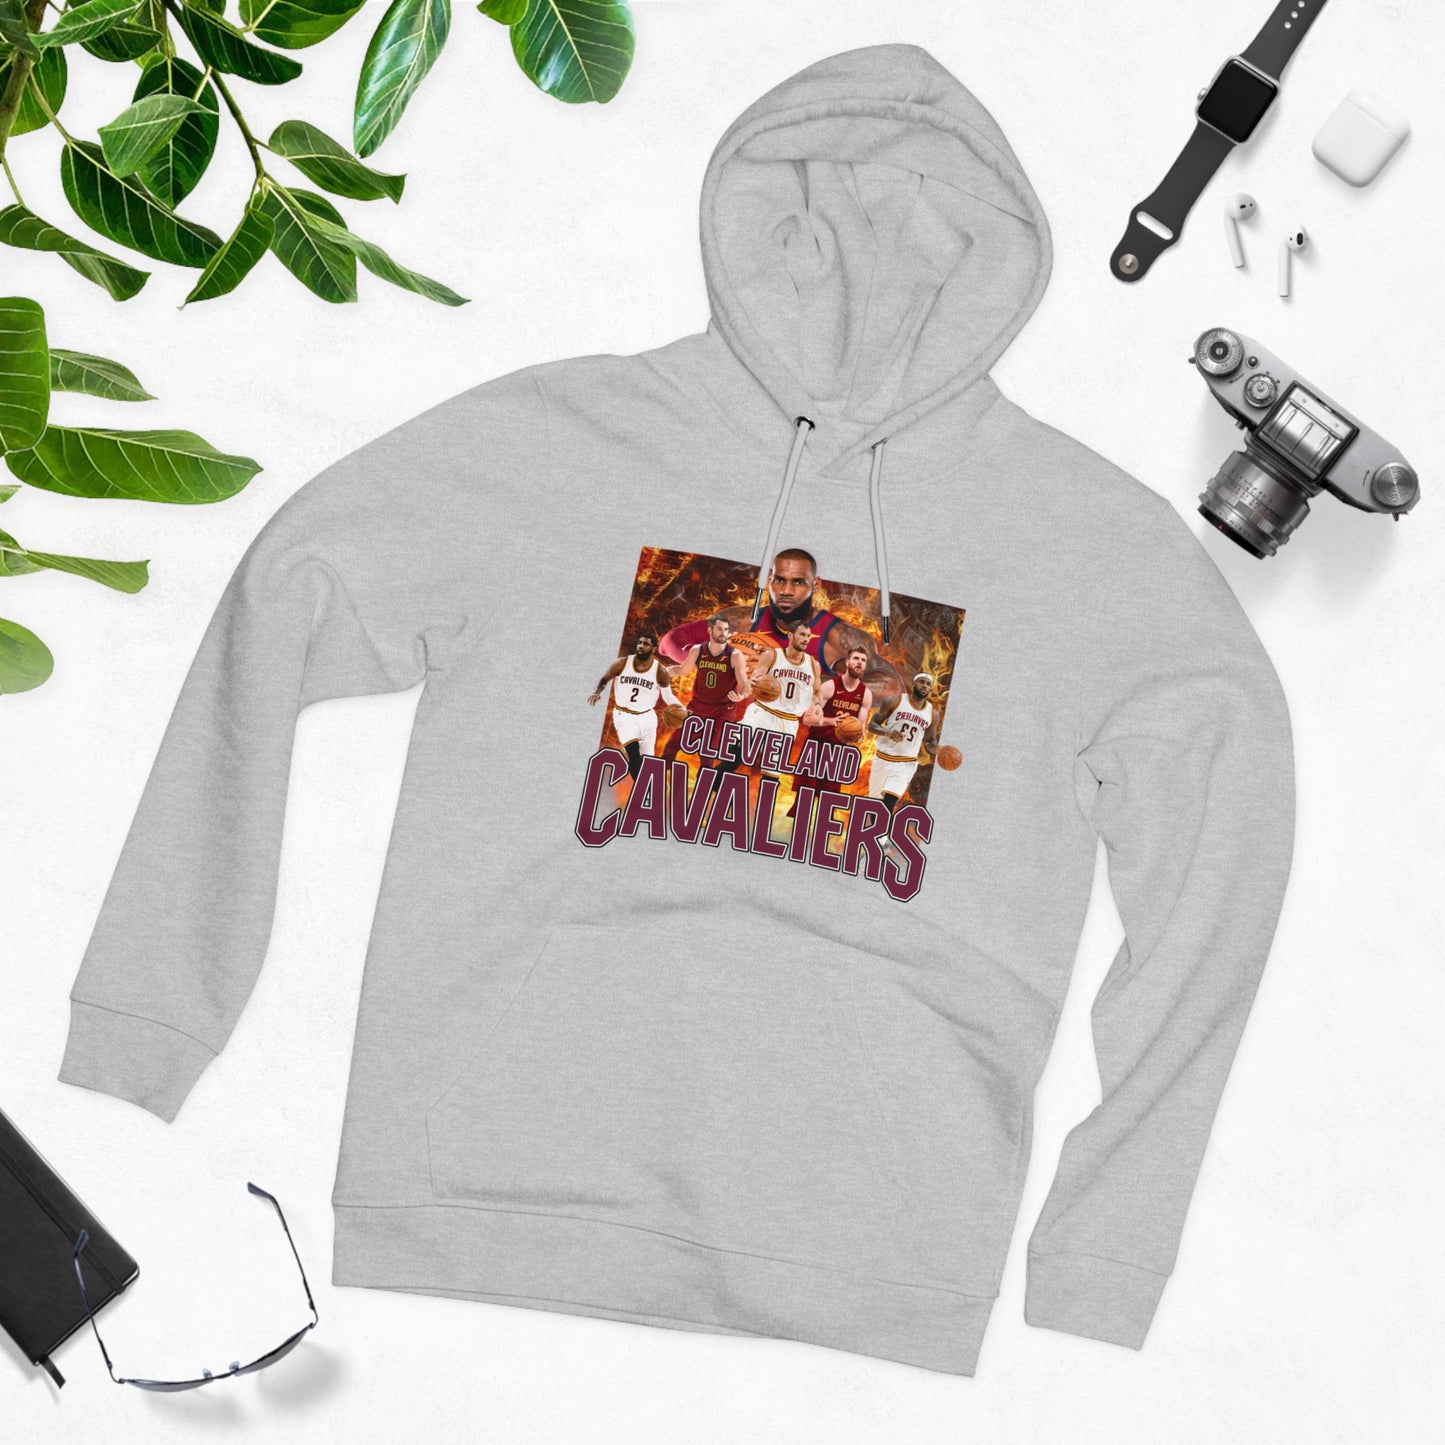 Cleveland Cavaliers High Quality Unisex Heavy Blend™ Hoodie